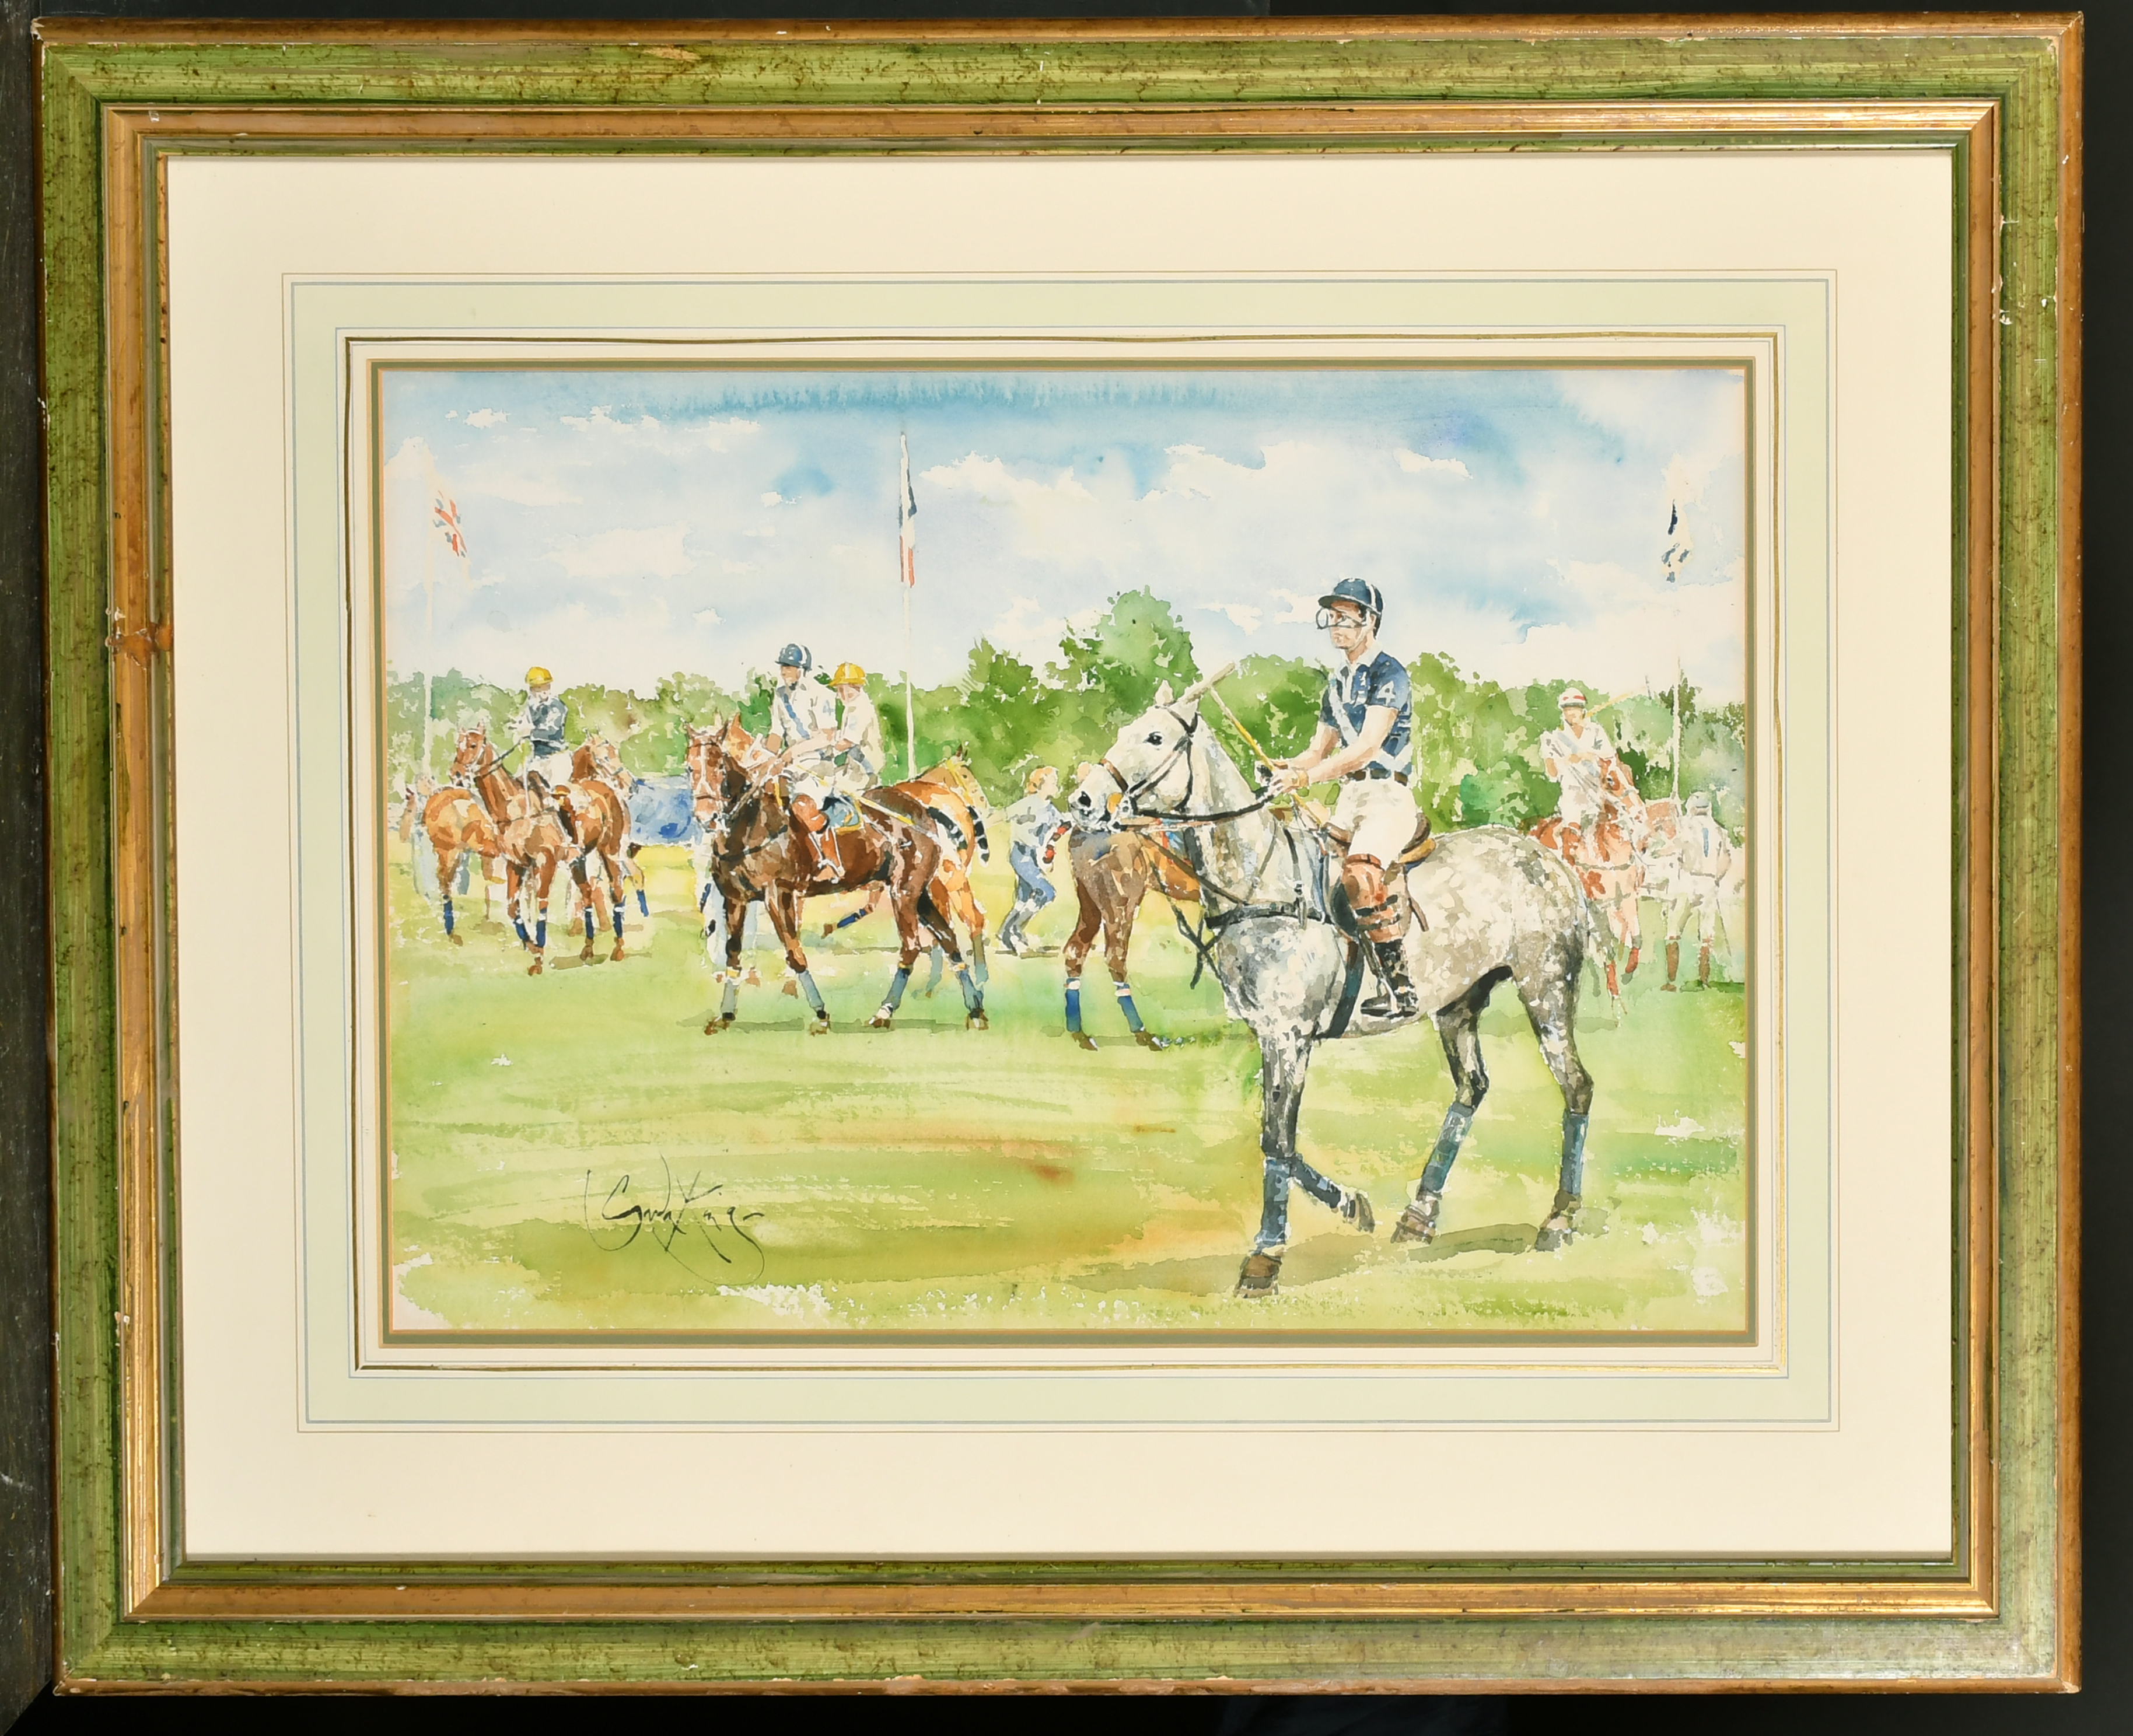 Gordon King (1939- ) British. "Competing for the Veuve Clicquot Gold Cup at Cowdray Park", - Image 2 of 5